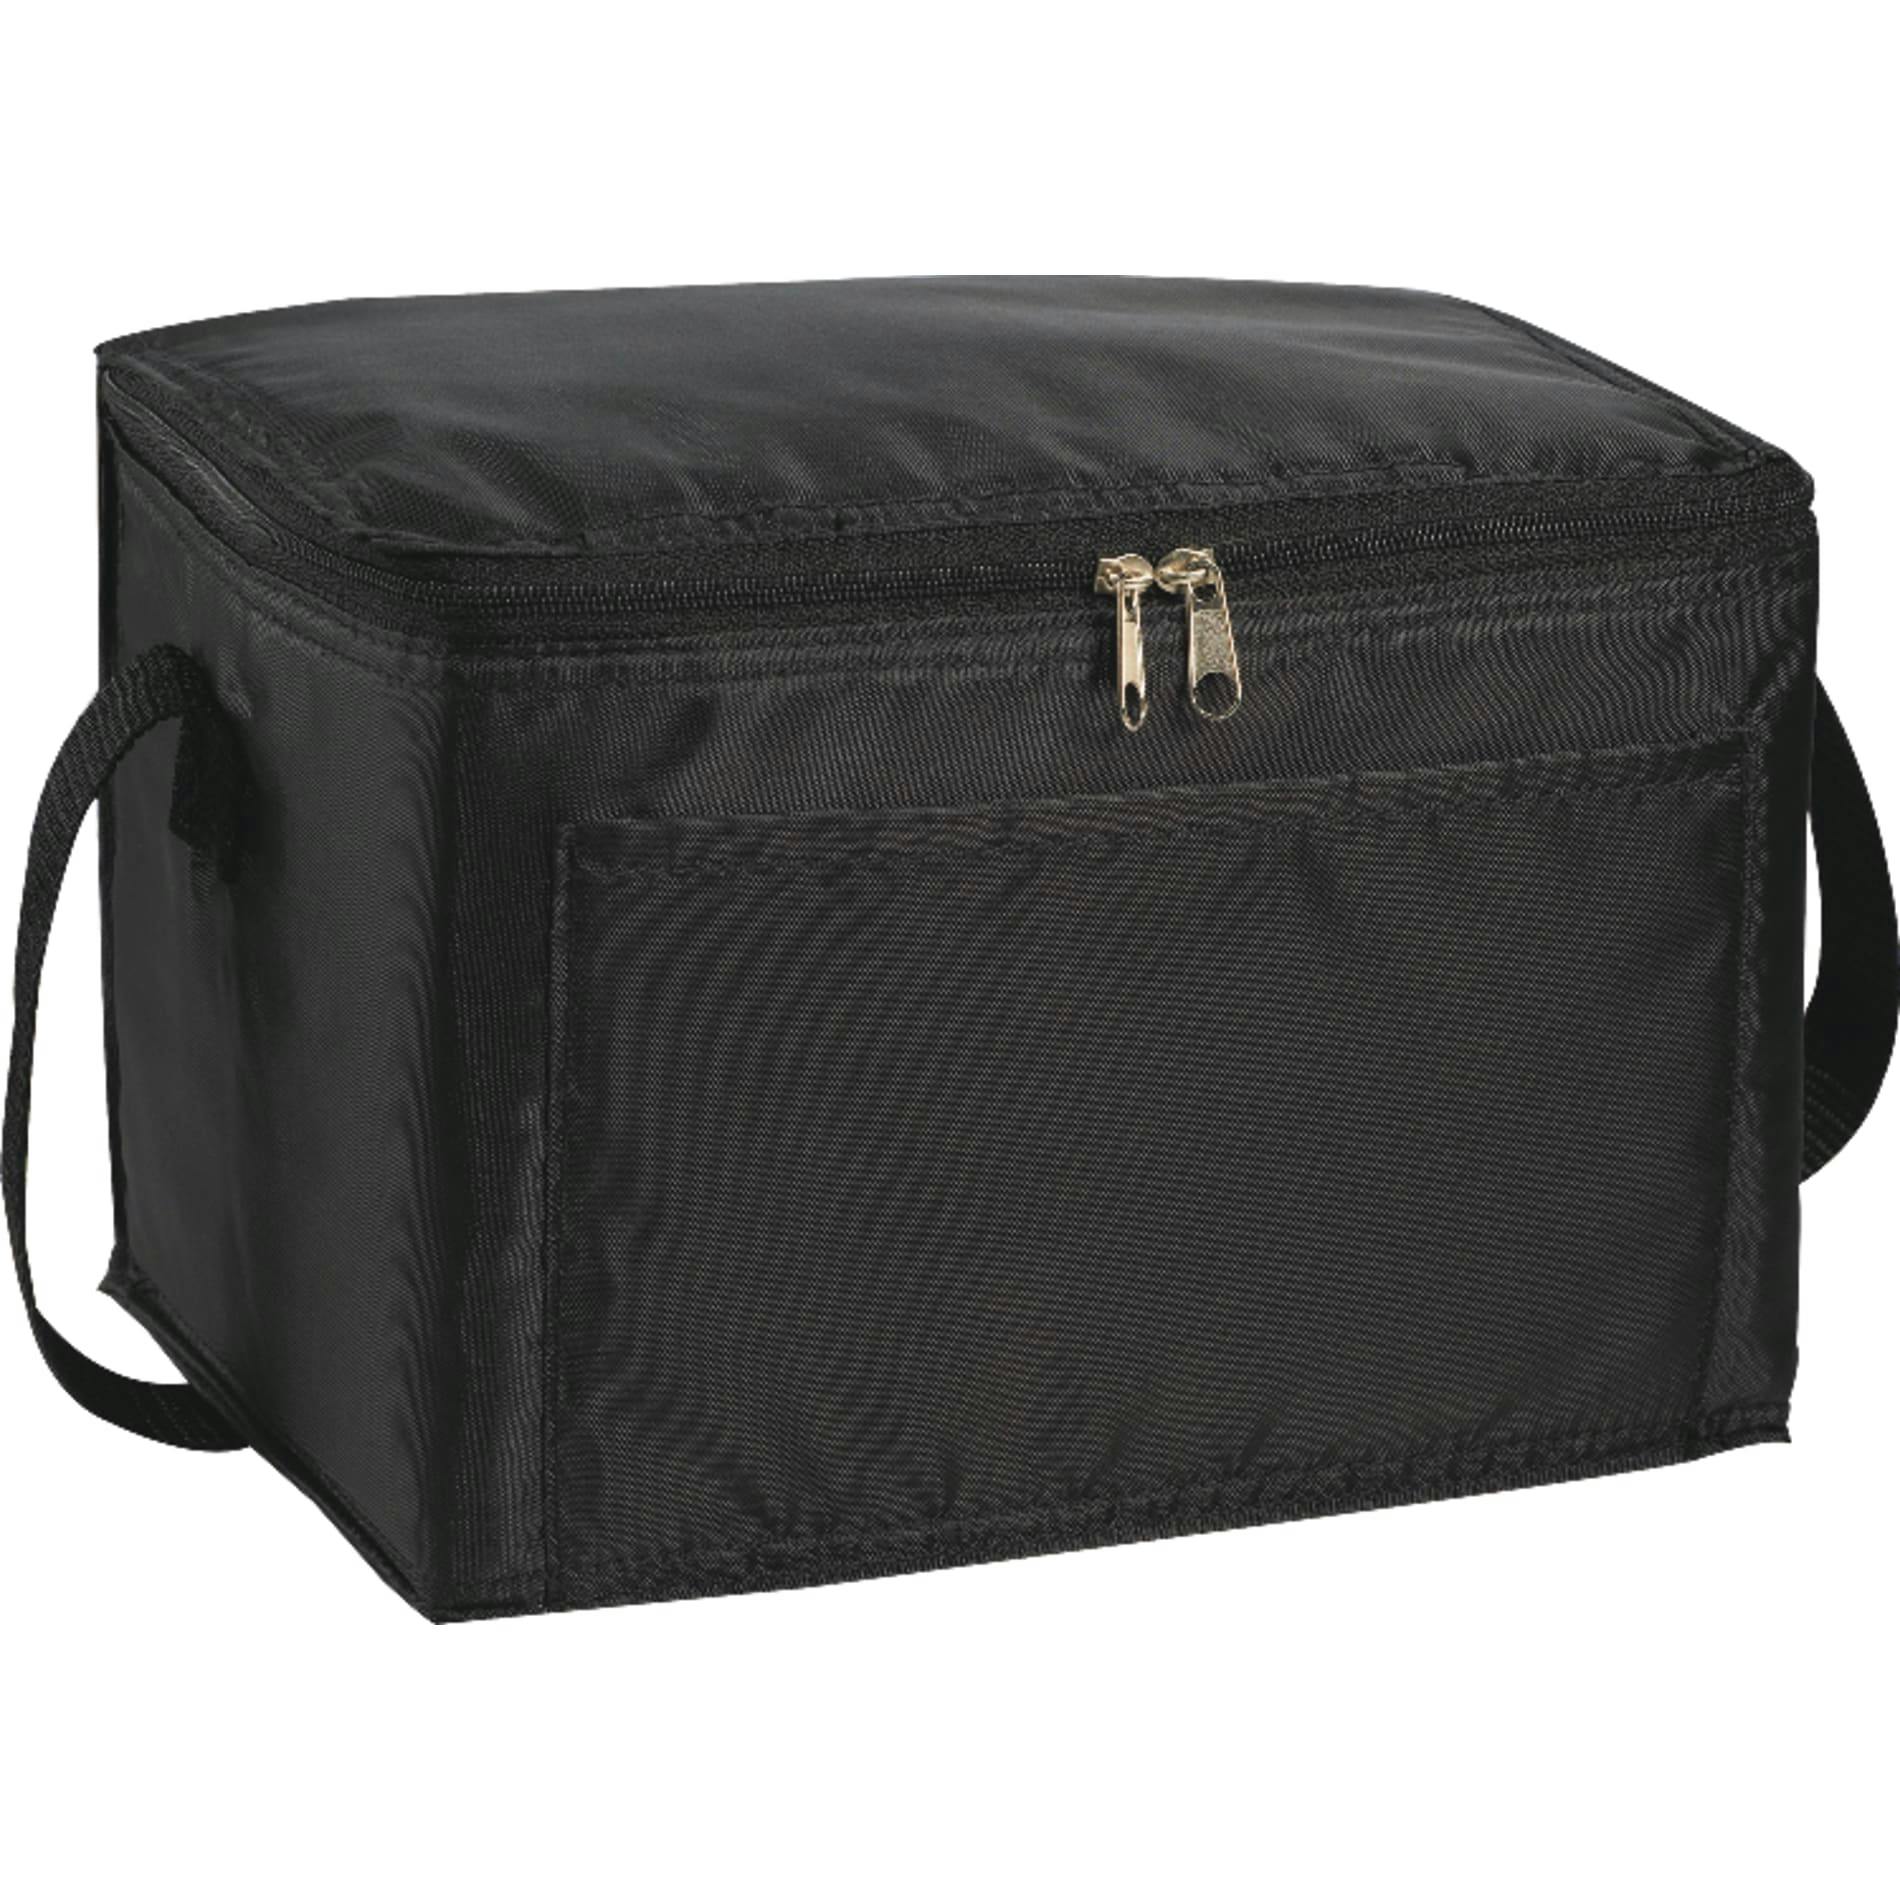 Spectrum Budget 6-Can Lunch Cooler - additional Image 1